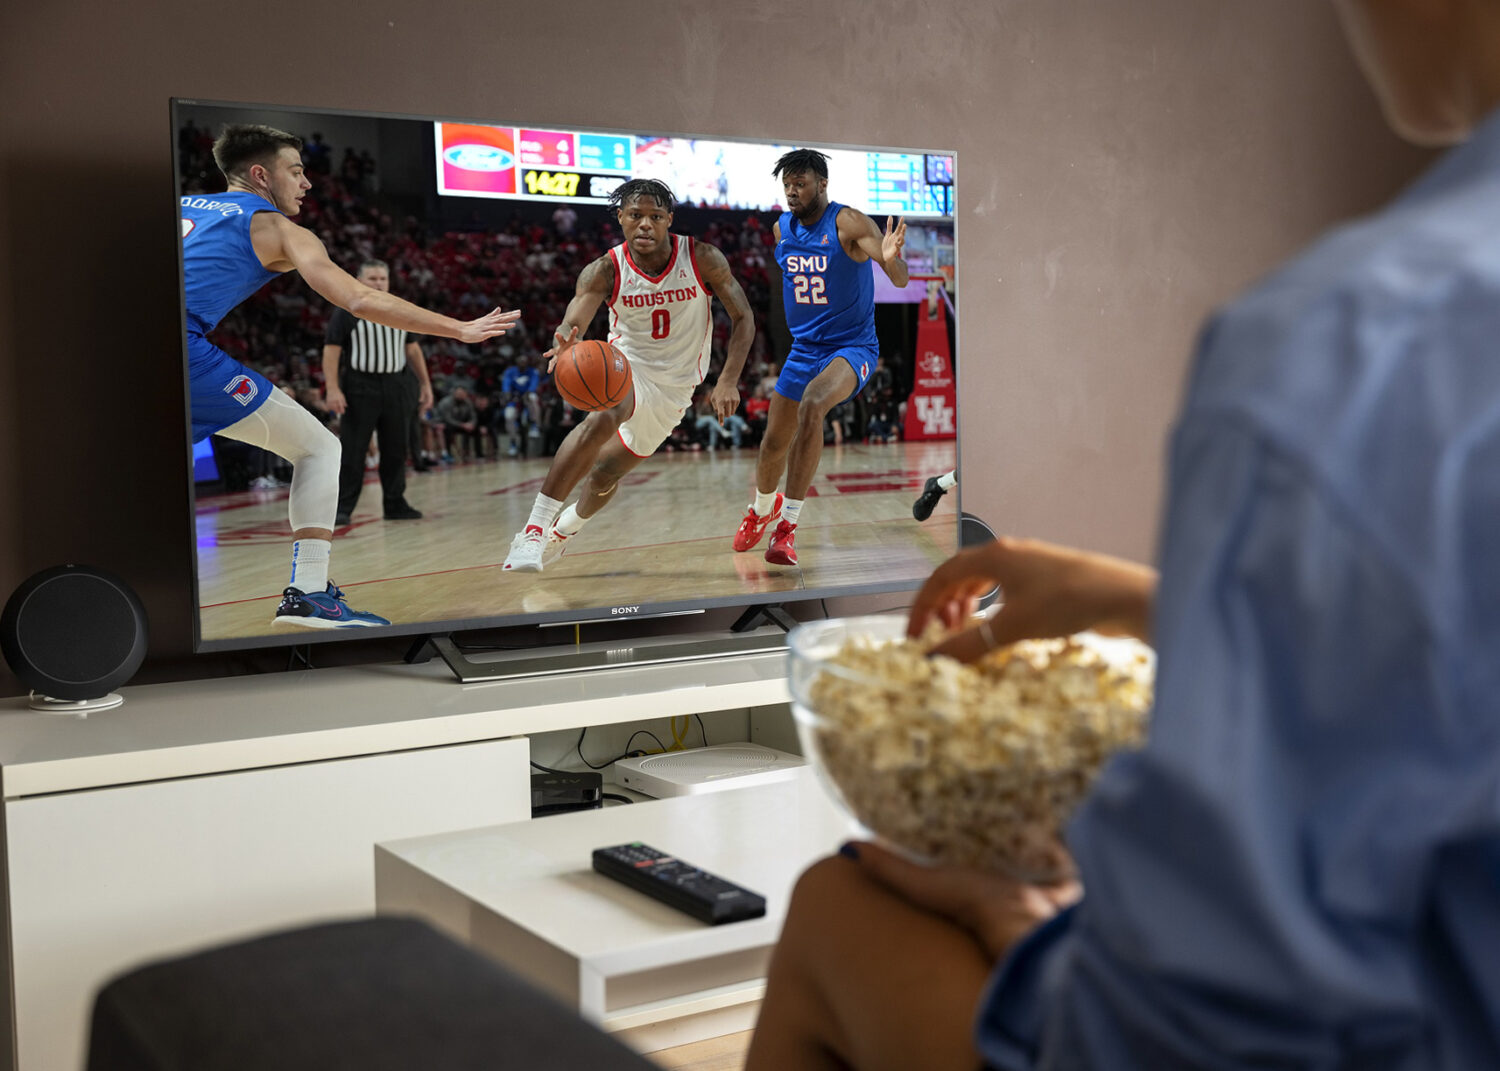 A person watching a basketball game on TV